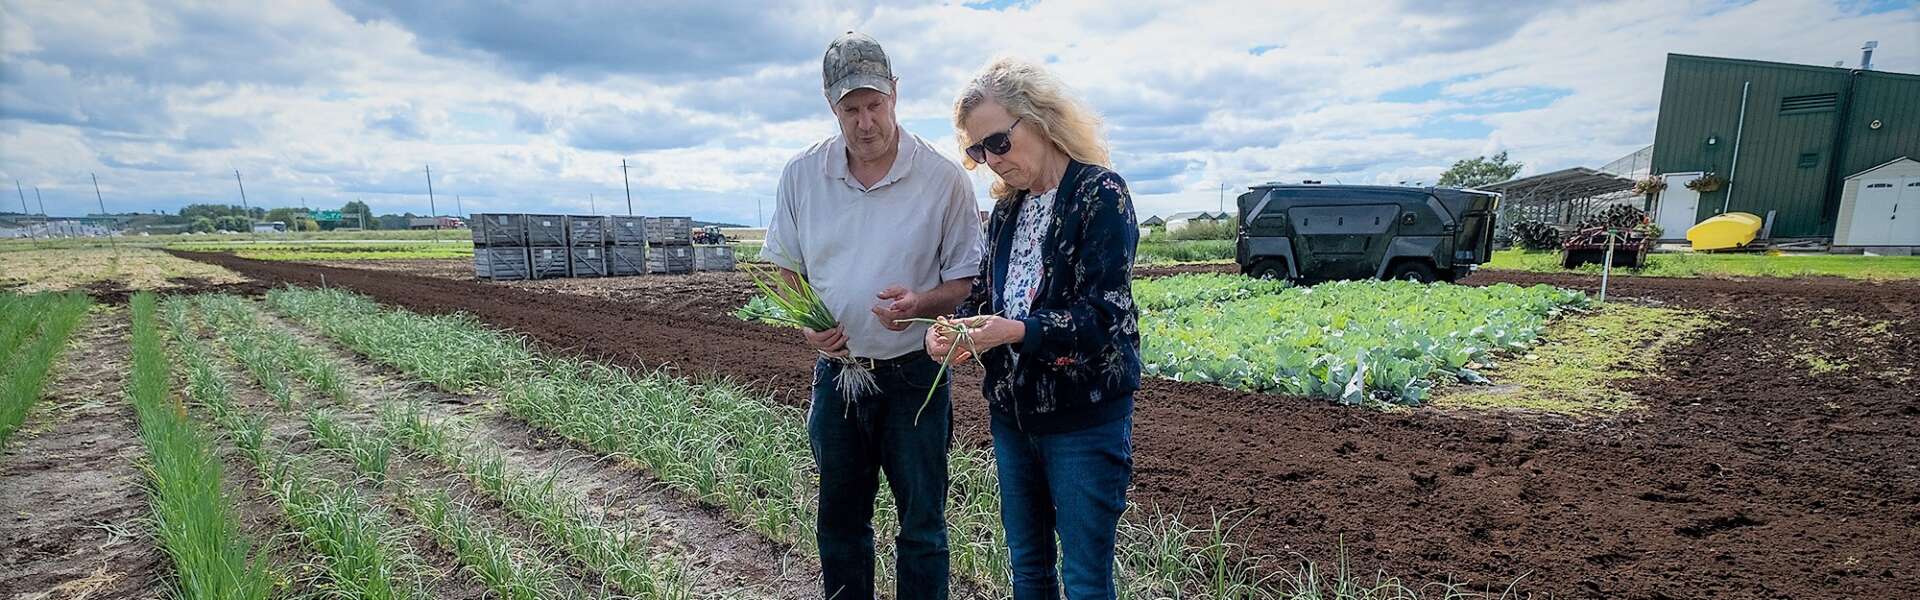 Two people stand in a field on a sunny day and inspect green onionsamples from a test polt